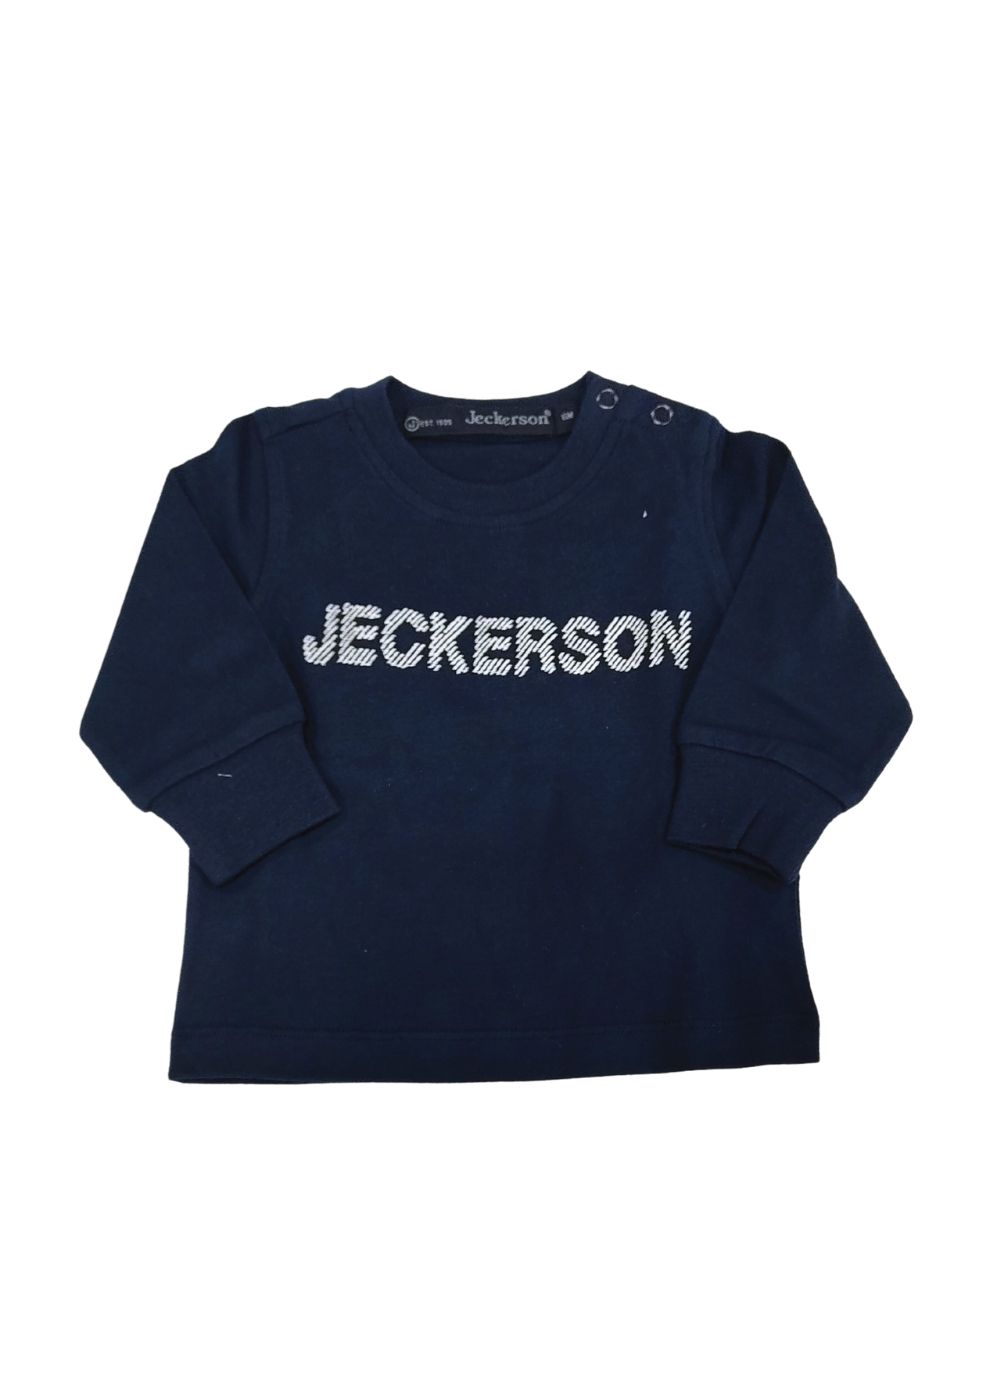 Featured image for “JECKERSON T-SHIRT LOGO”